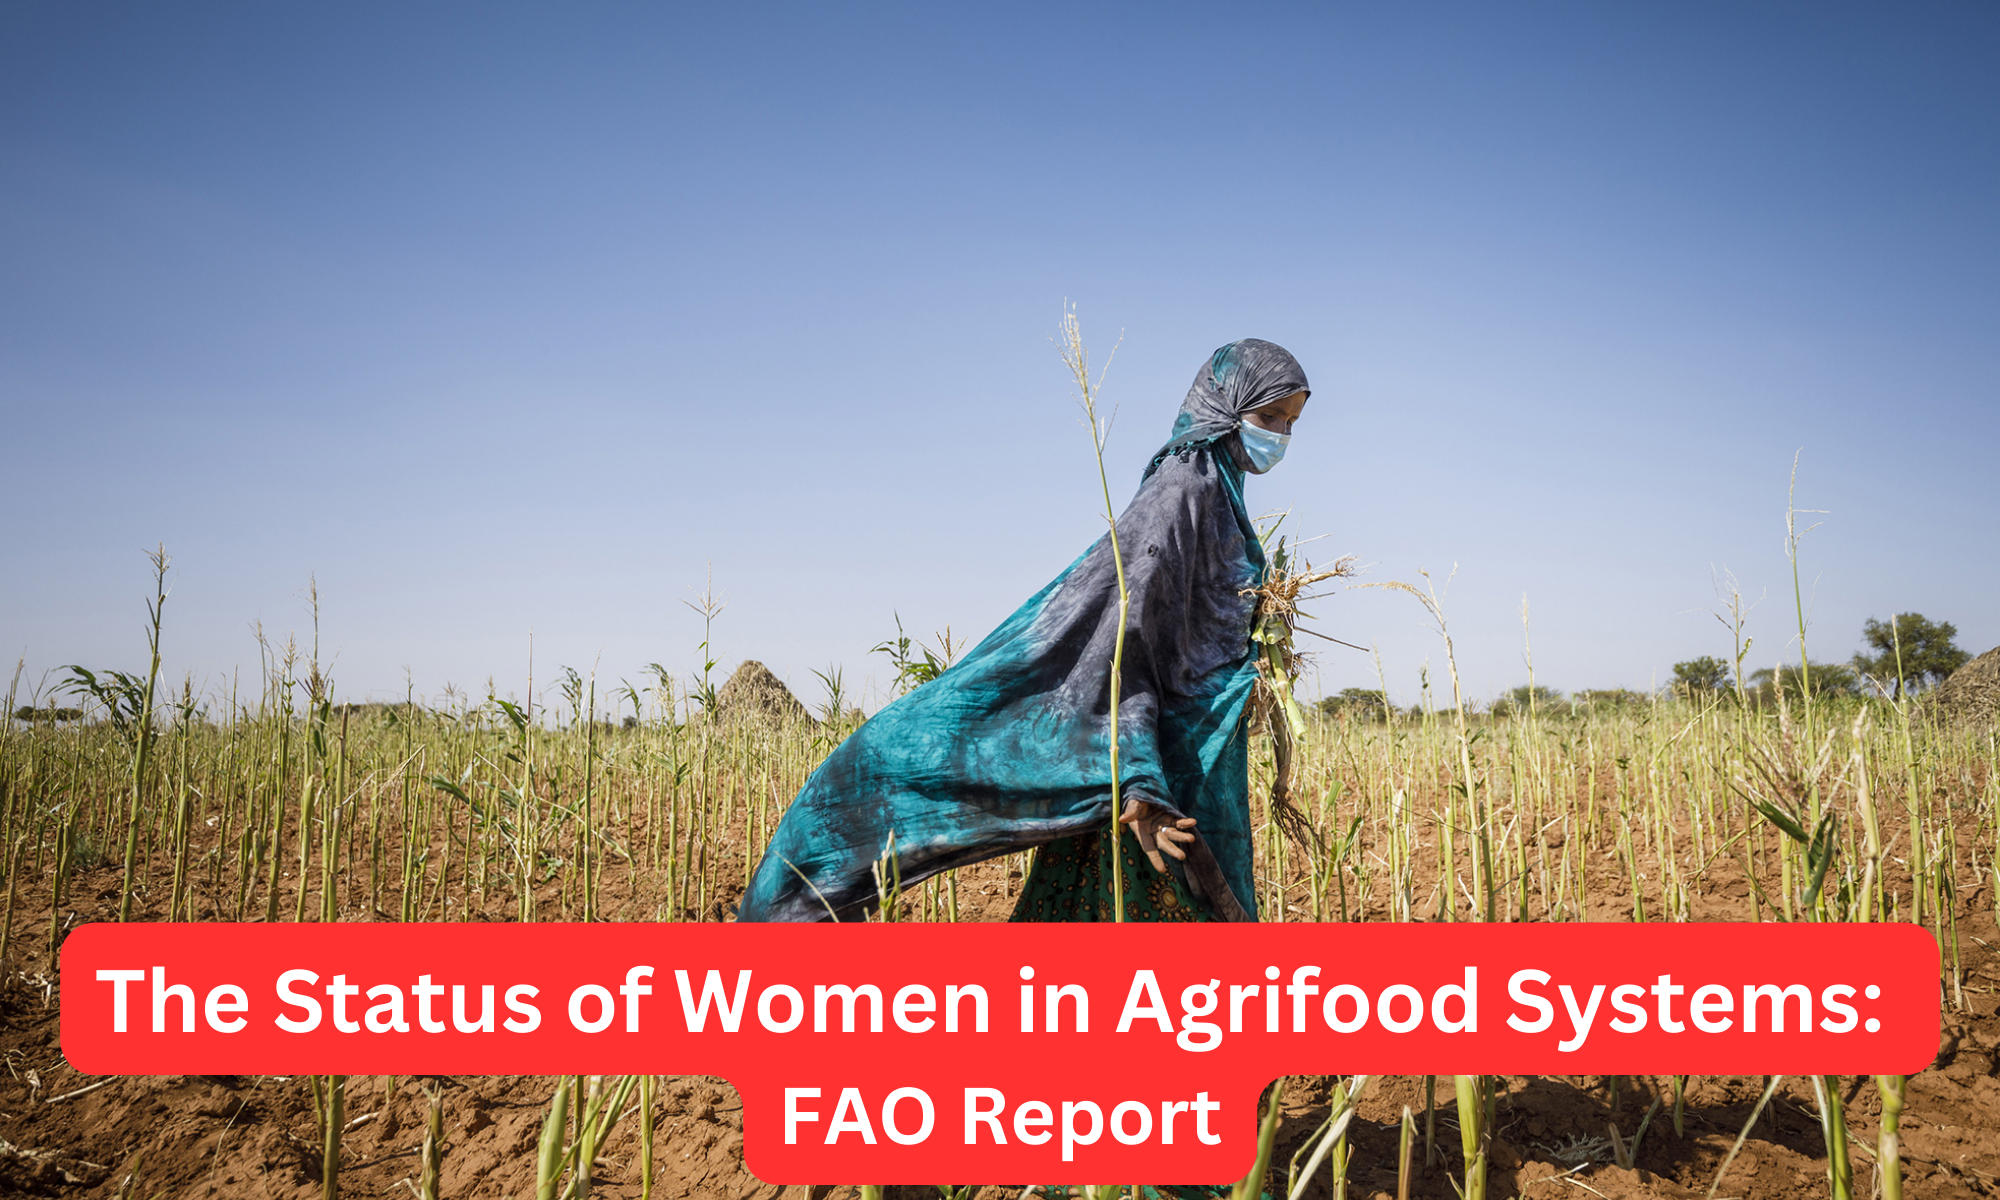 FAO Report on The Status of Women in Agrifood Systems_30.1